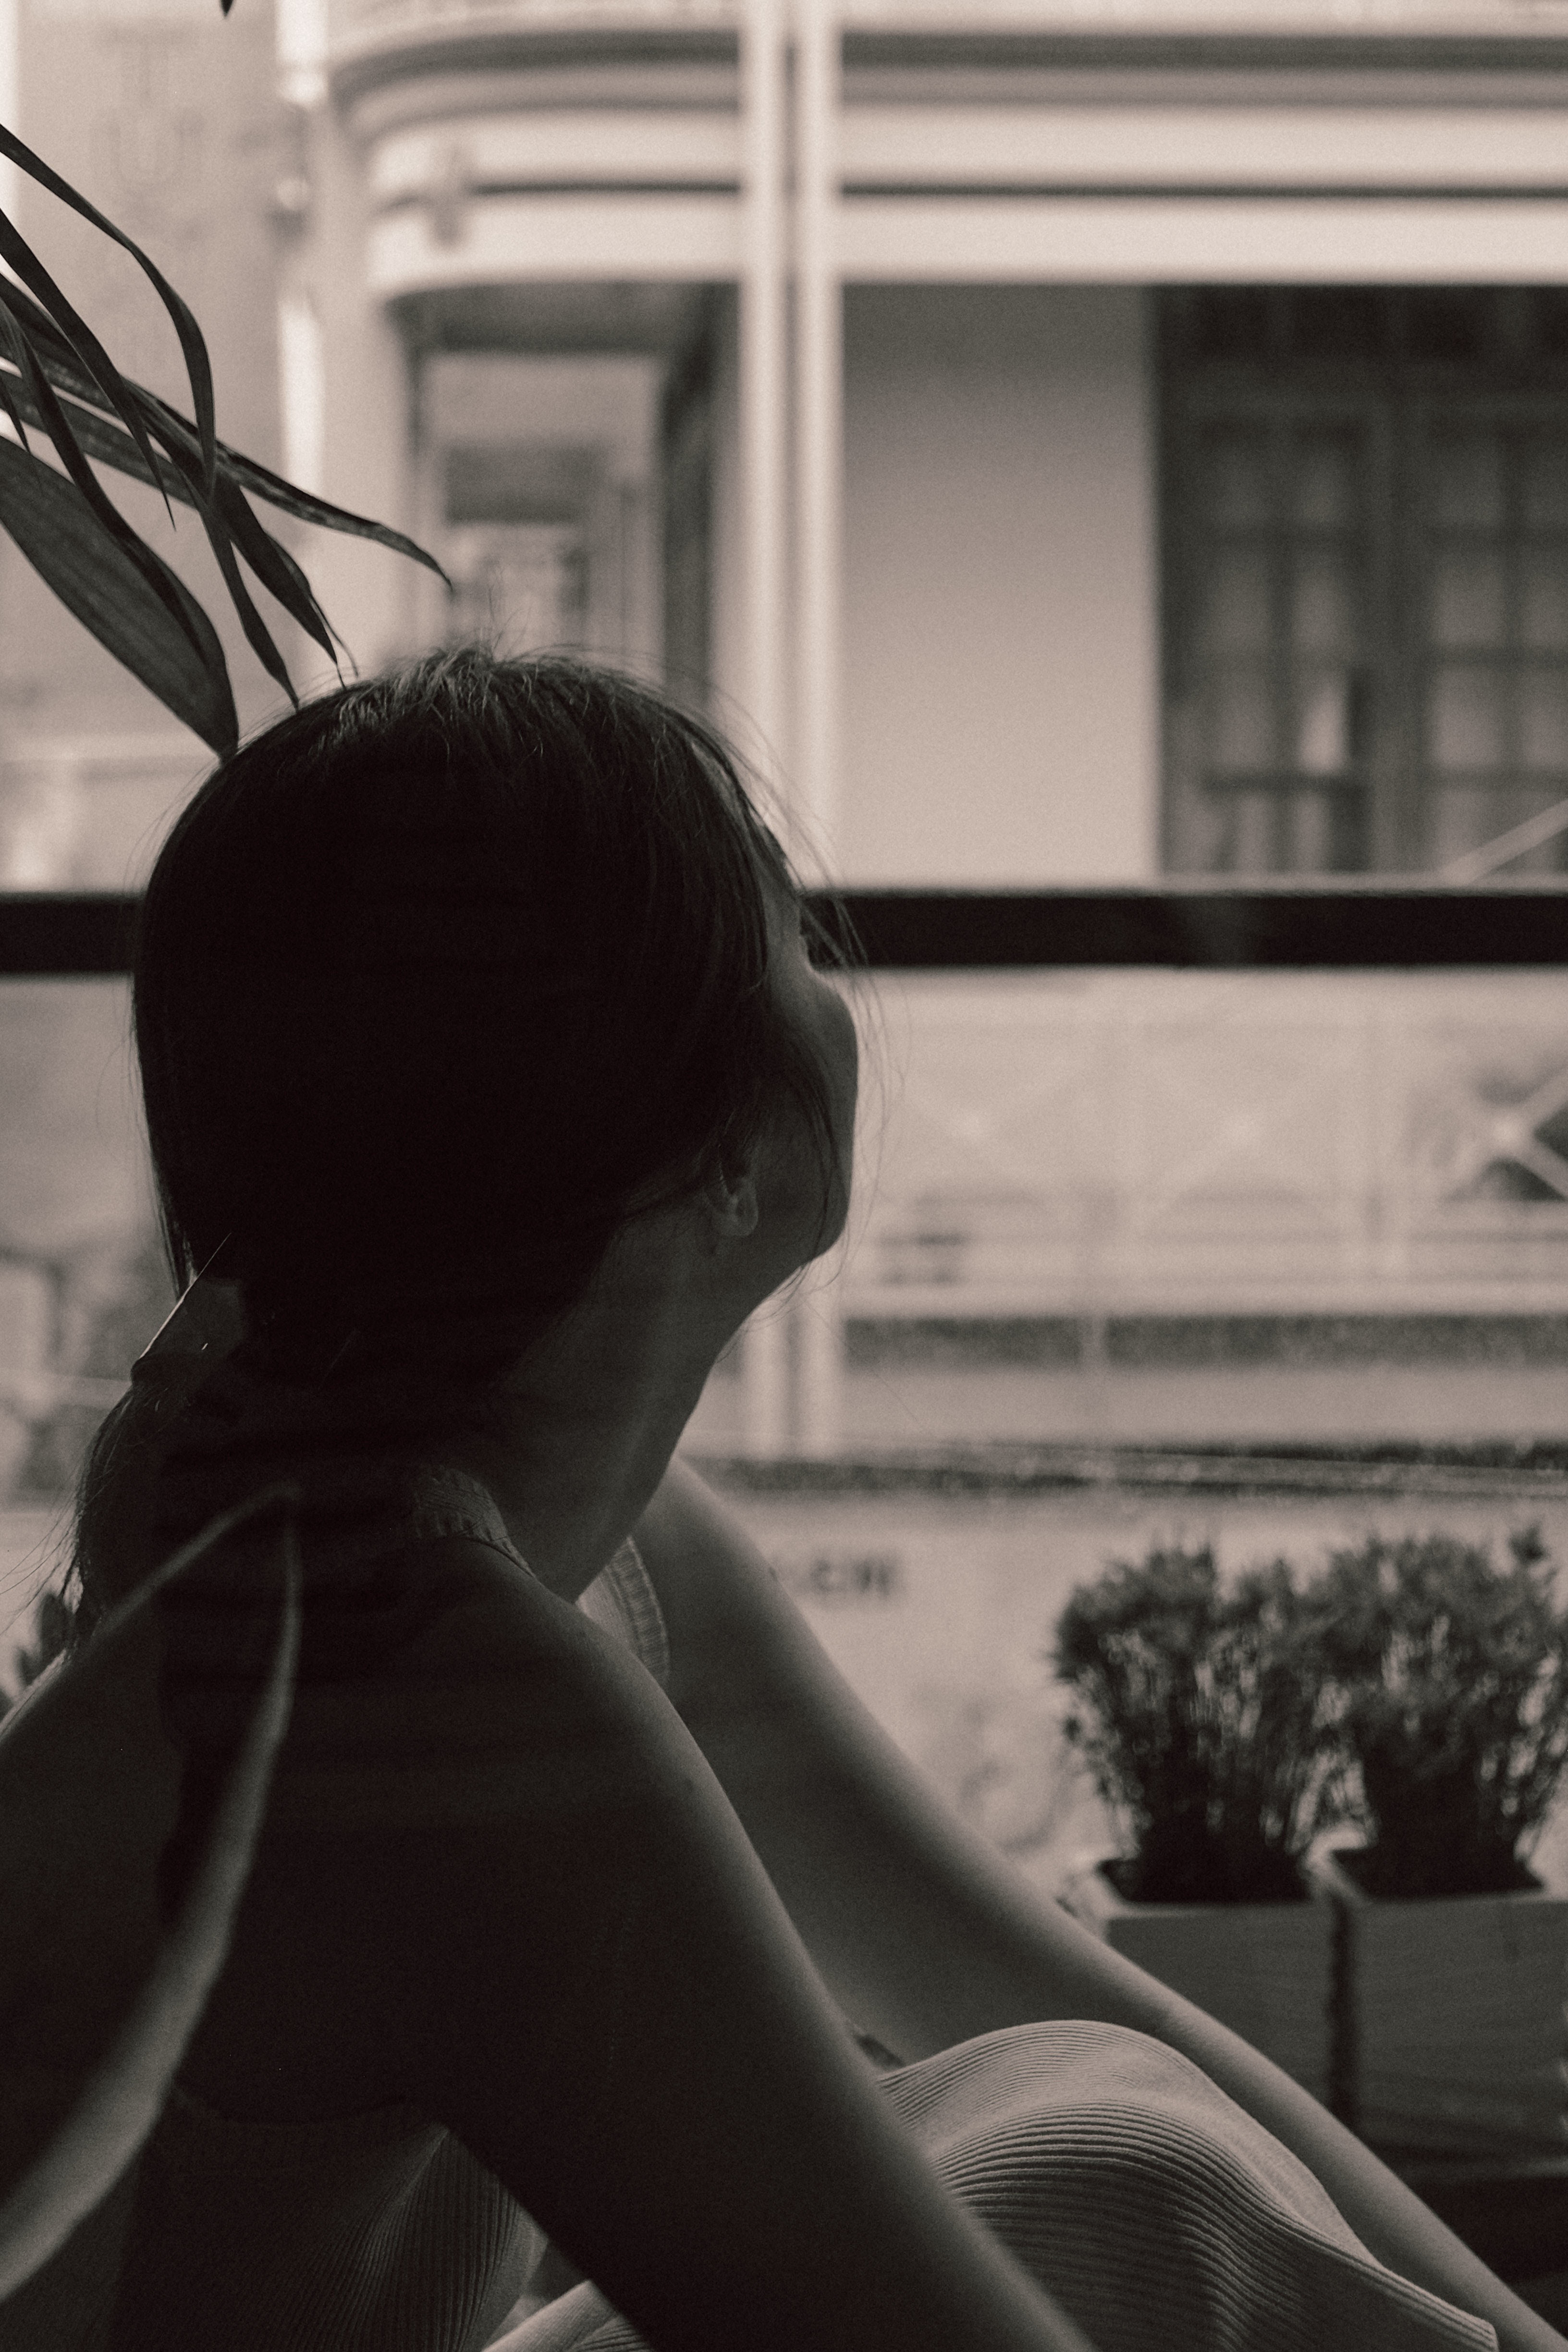 Image of a woman in silhouette looking out a window.